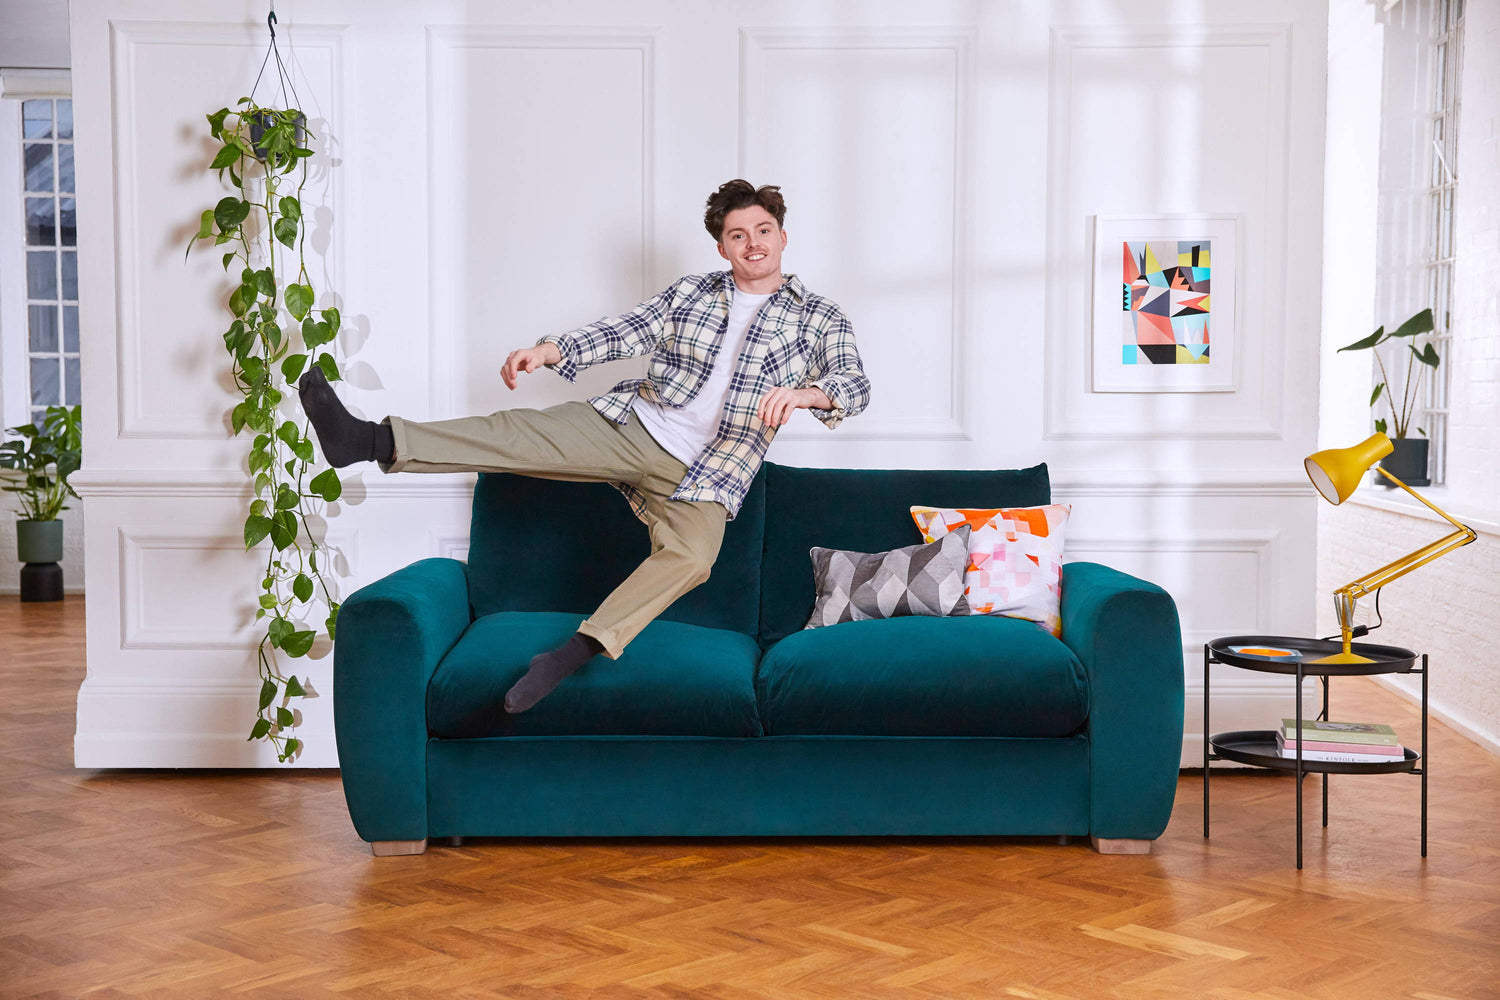  All You Need to Know About Our Green Sofas 